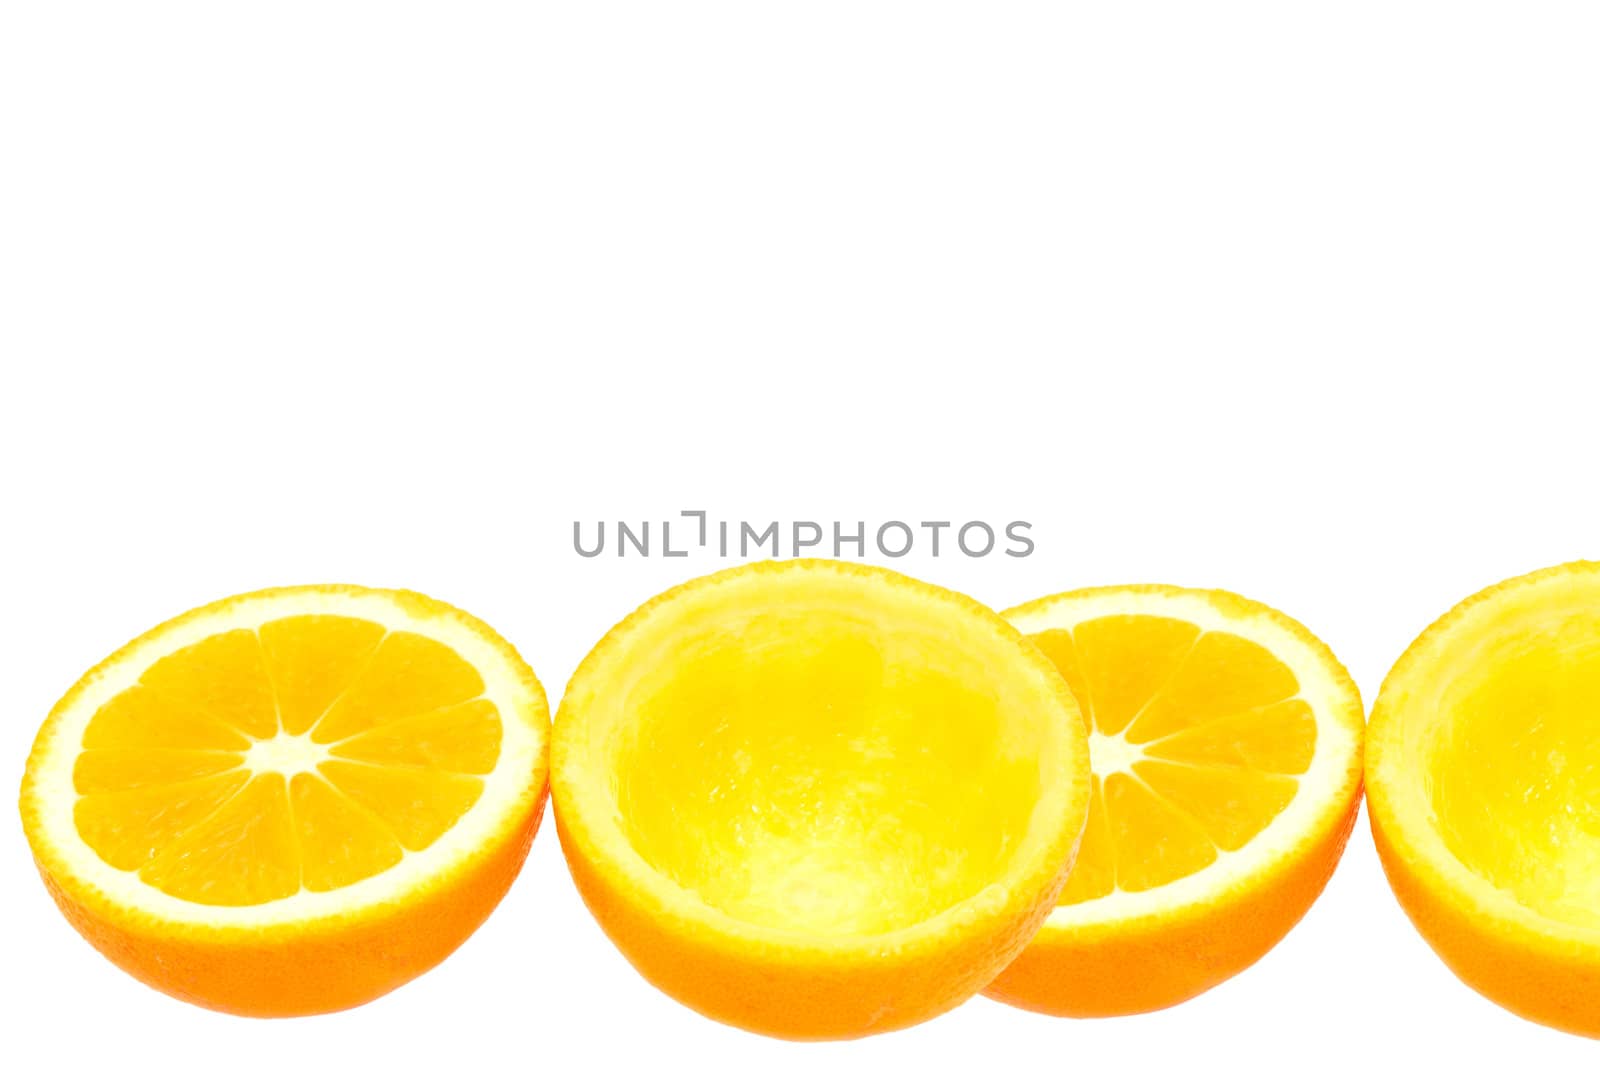 squeezed orange halves without squeezing by Carche